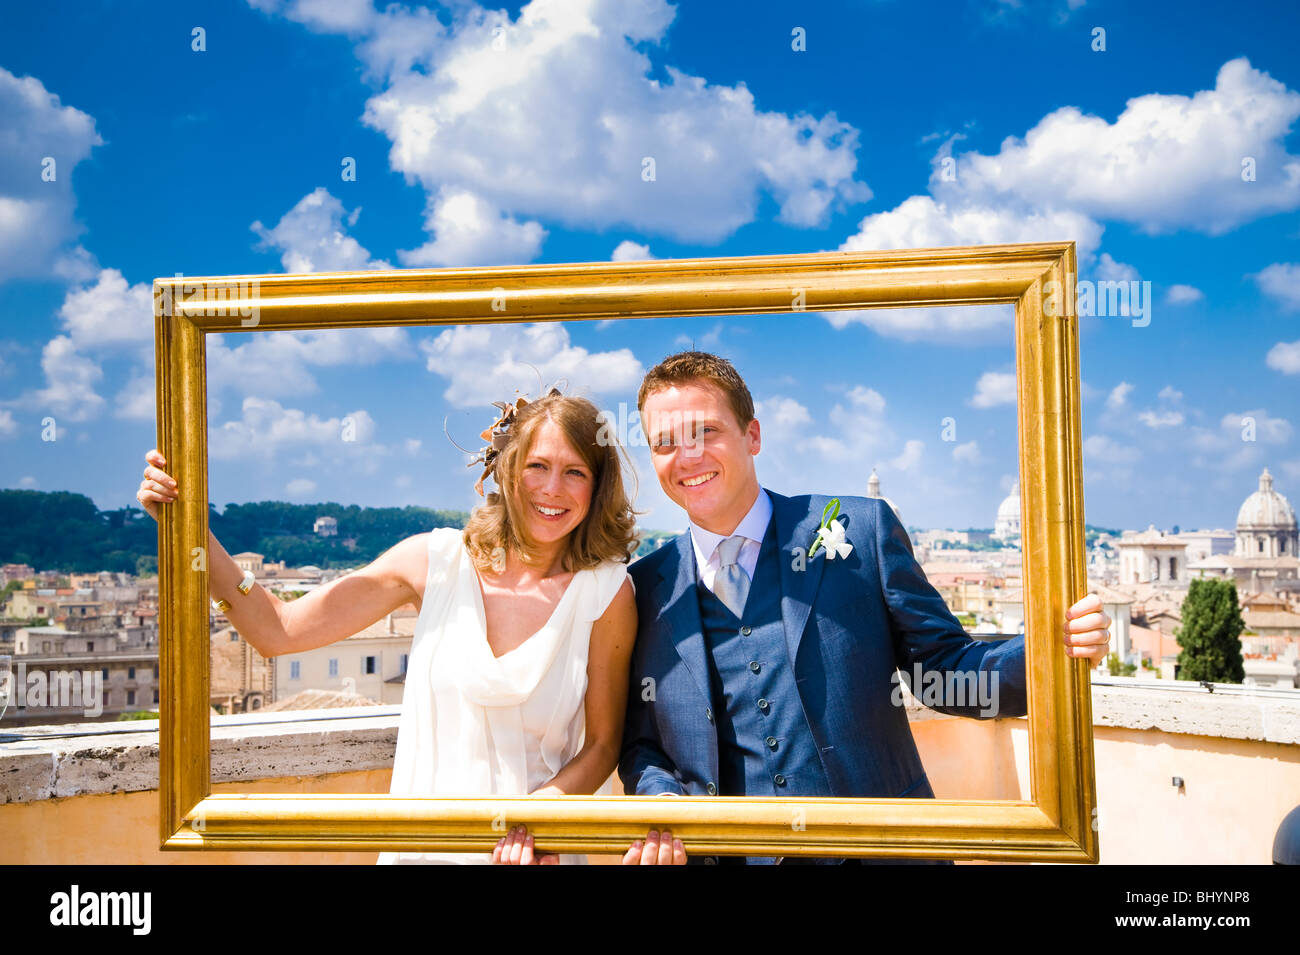 Bride and groom holding gold picture frame on wedding day in Rome, Italy Stock Photo